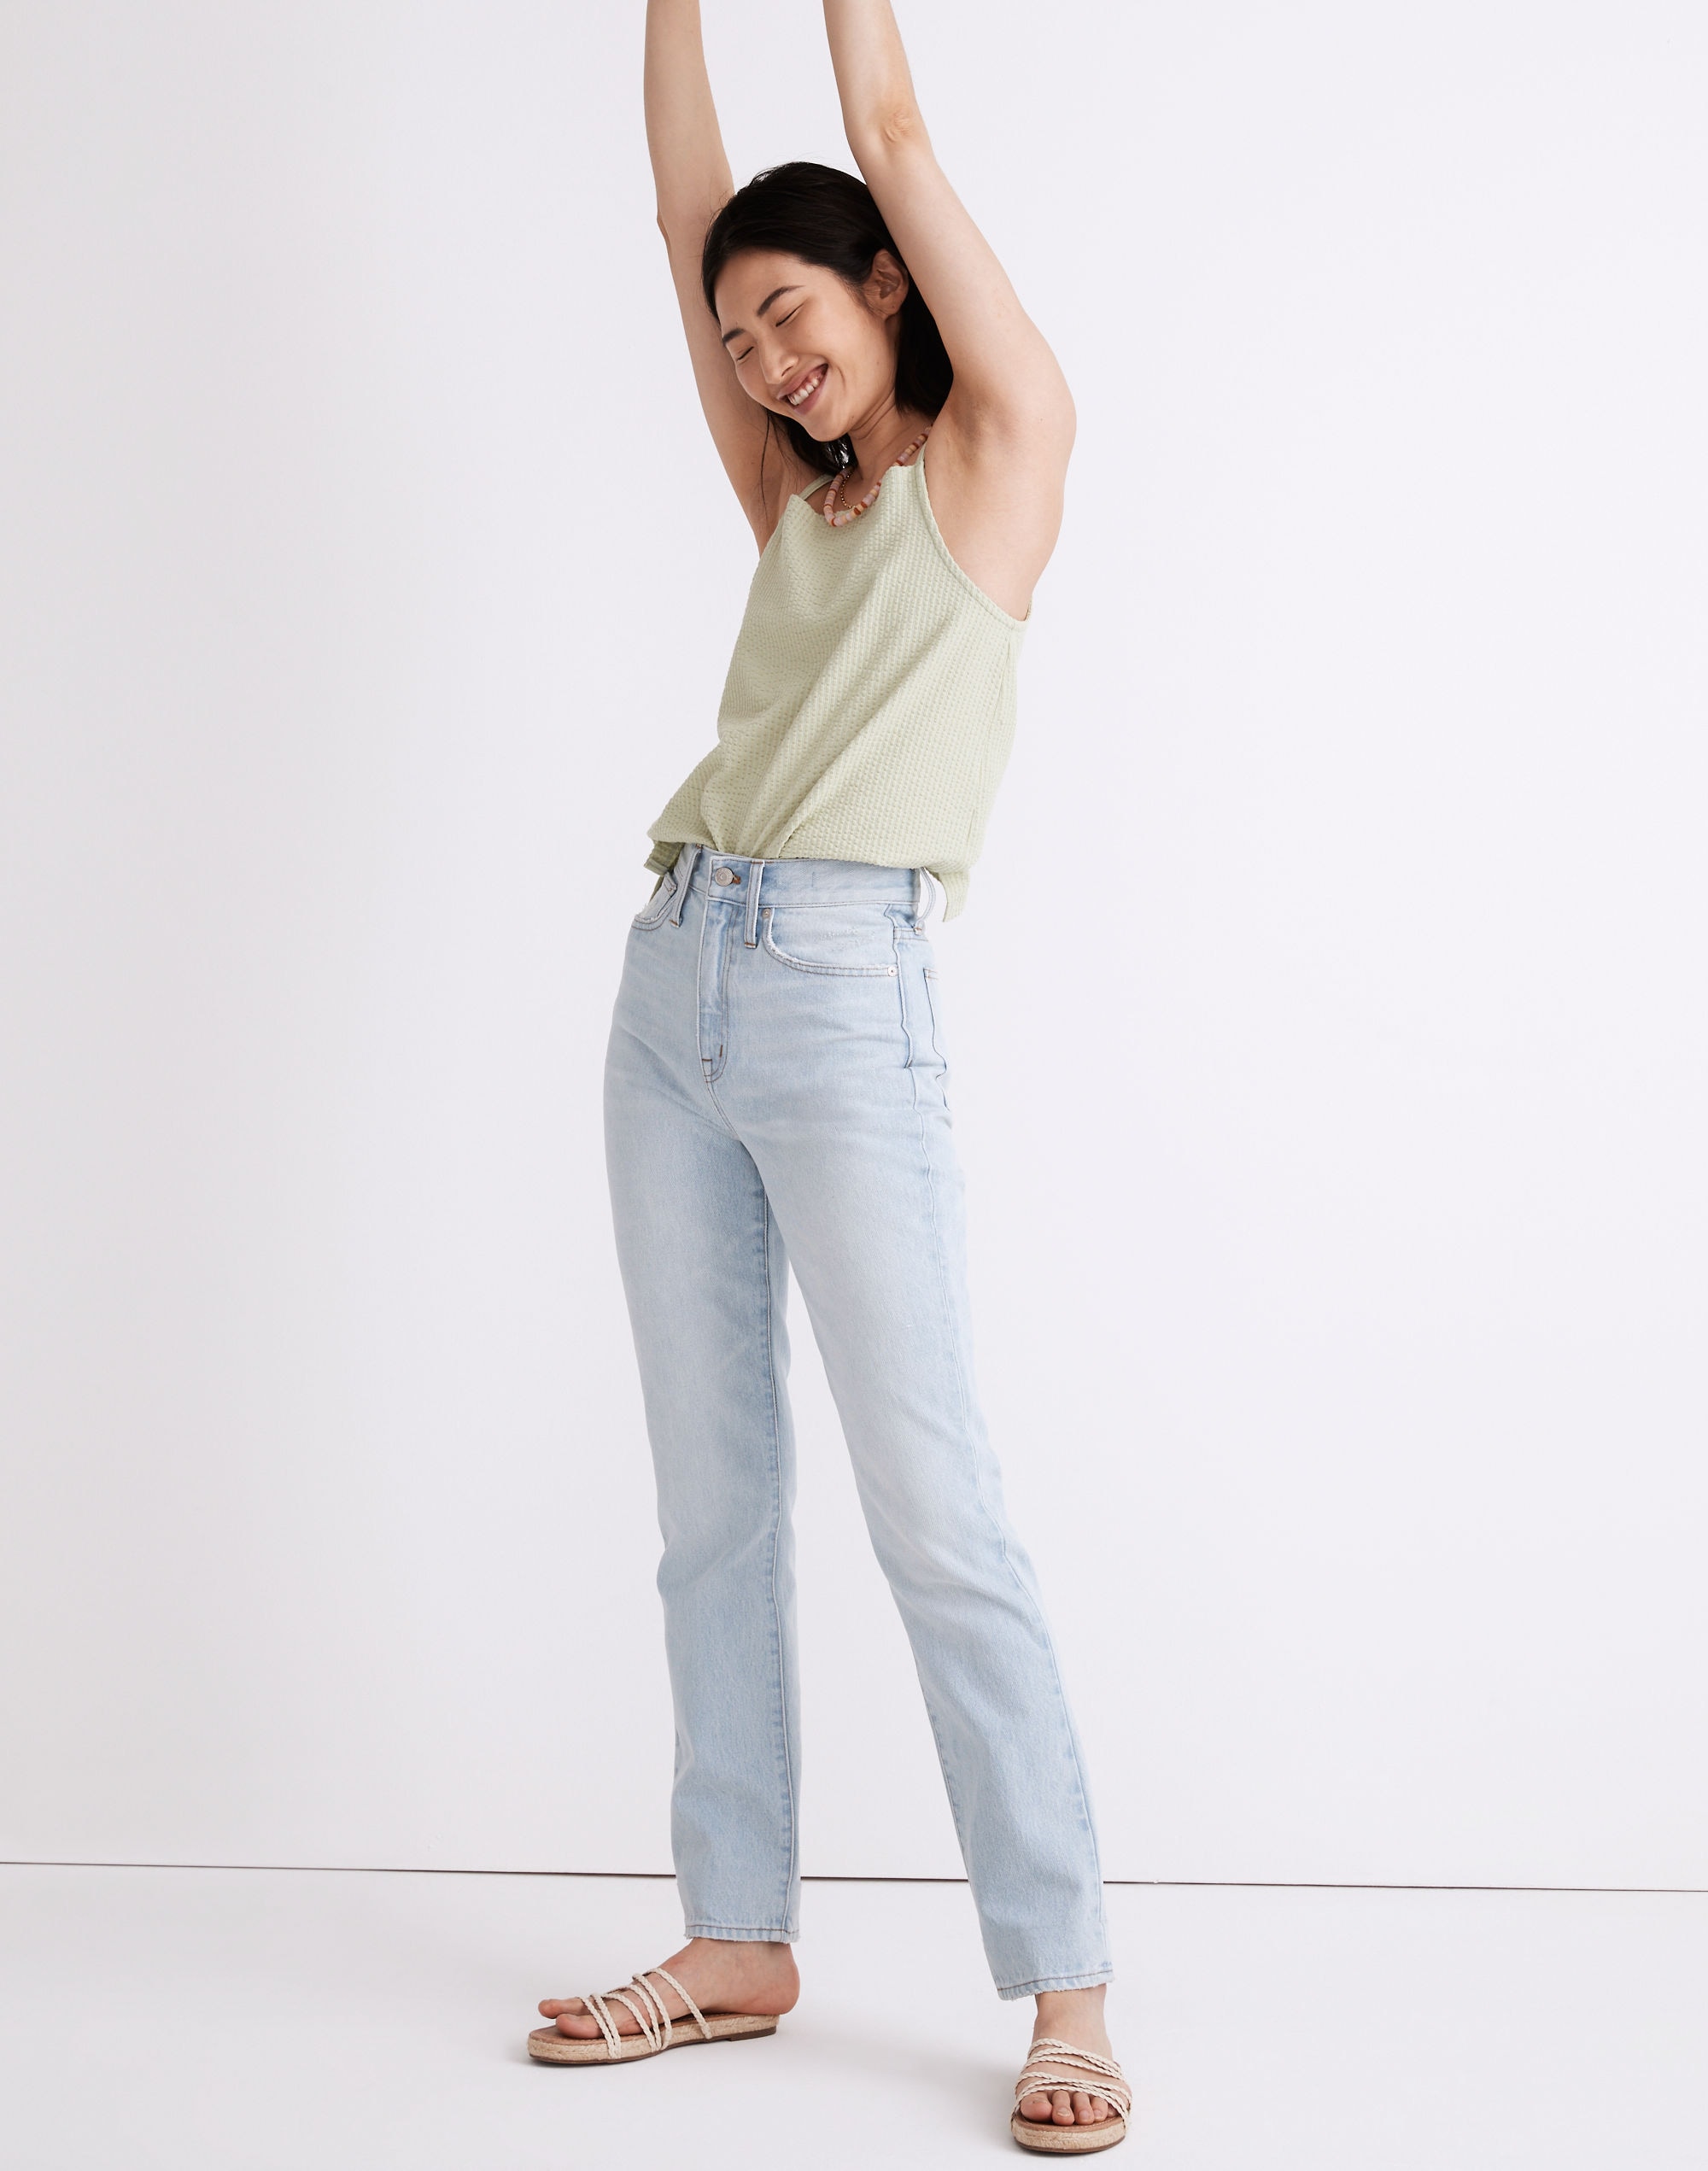 Classic Straight Full-Length Jeans in Fitzgerald Wash